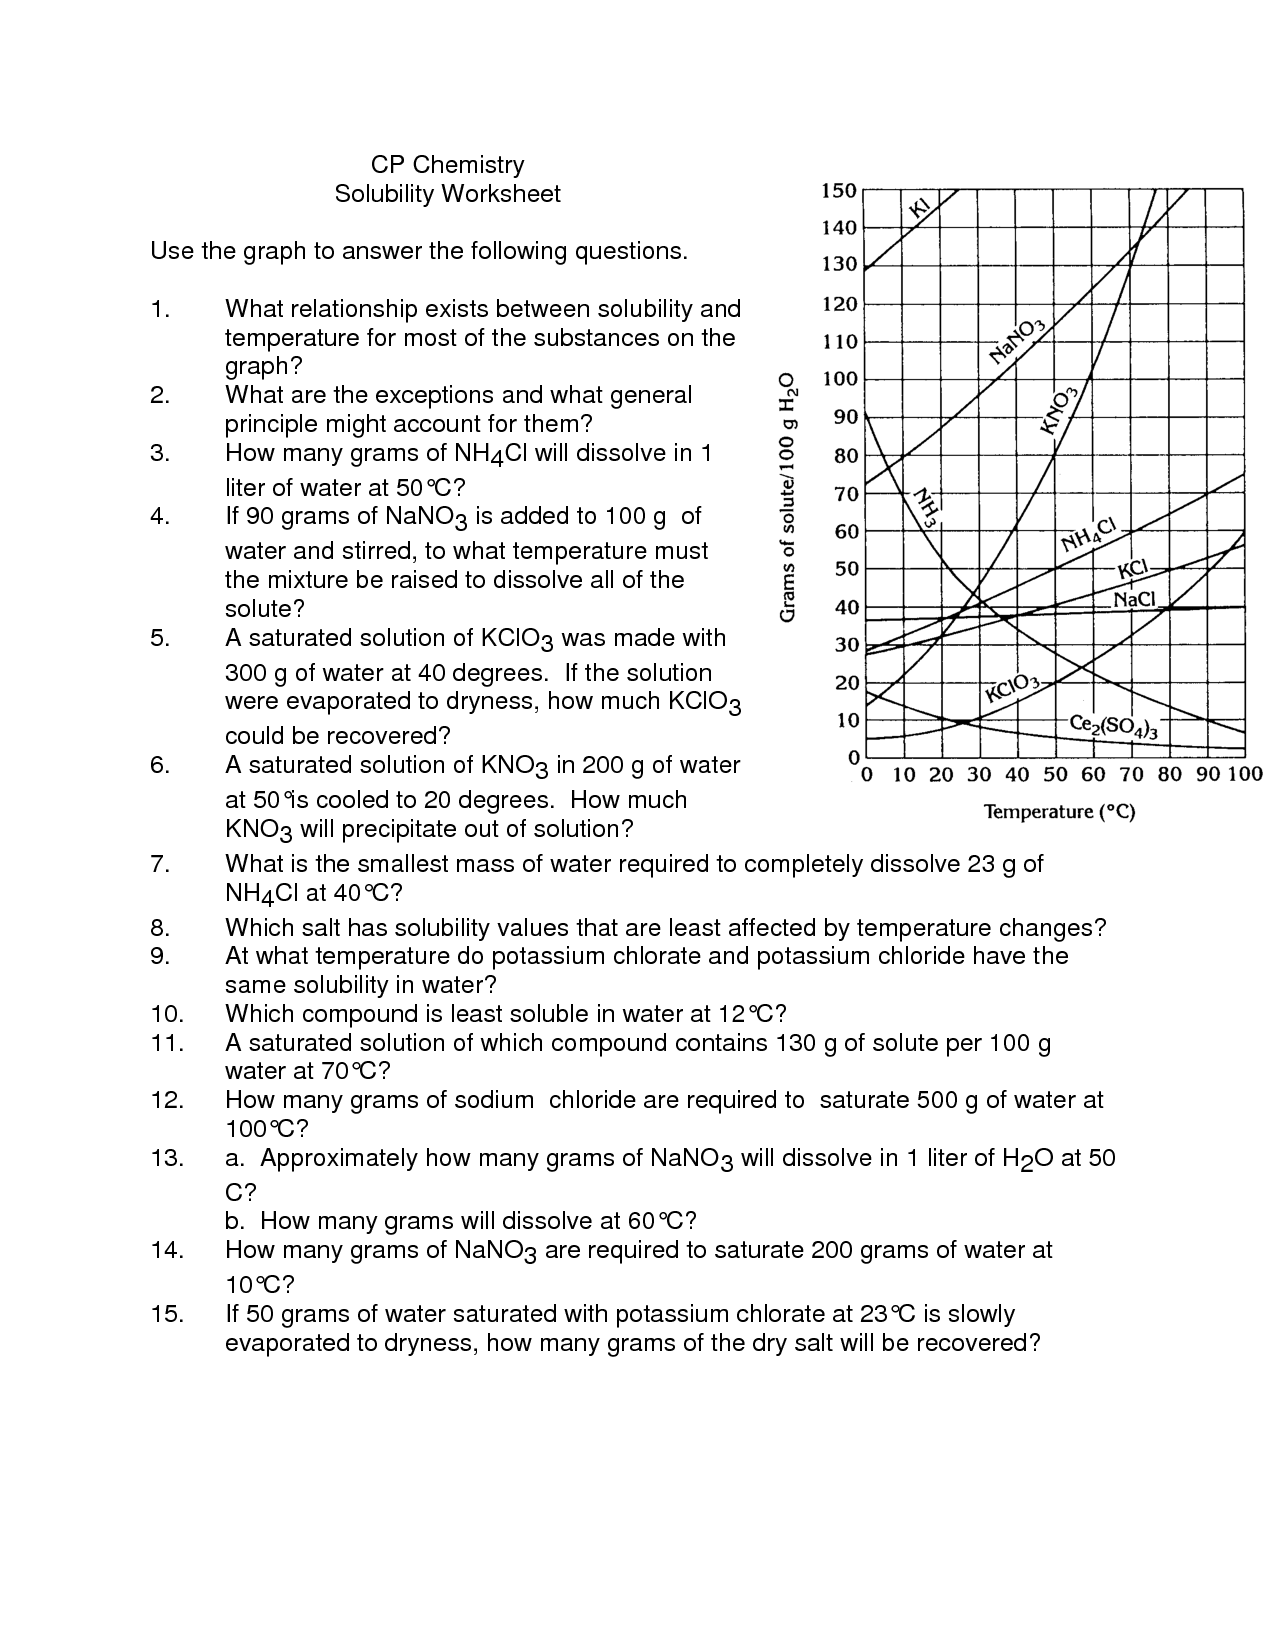 solutions and solubility worksheet answers